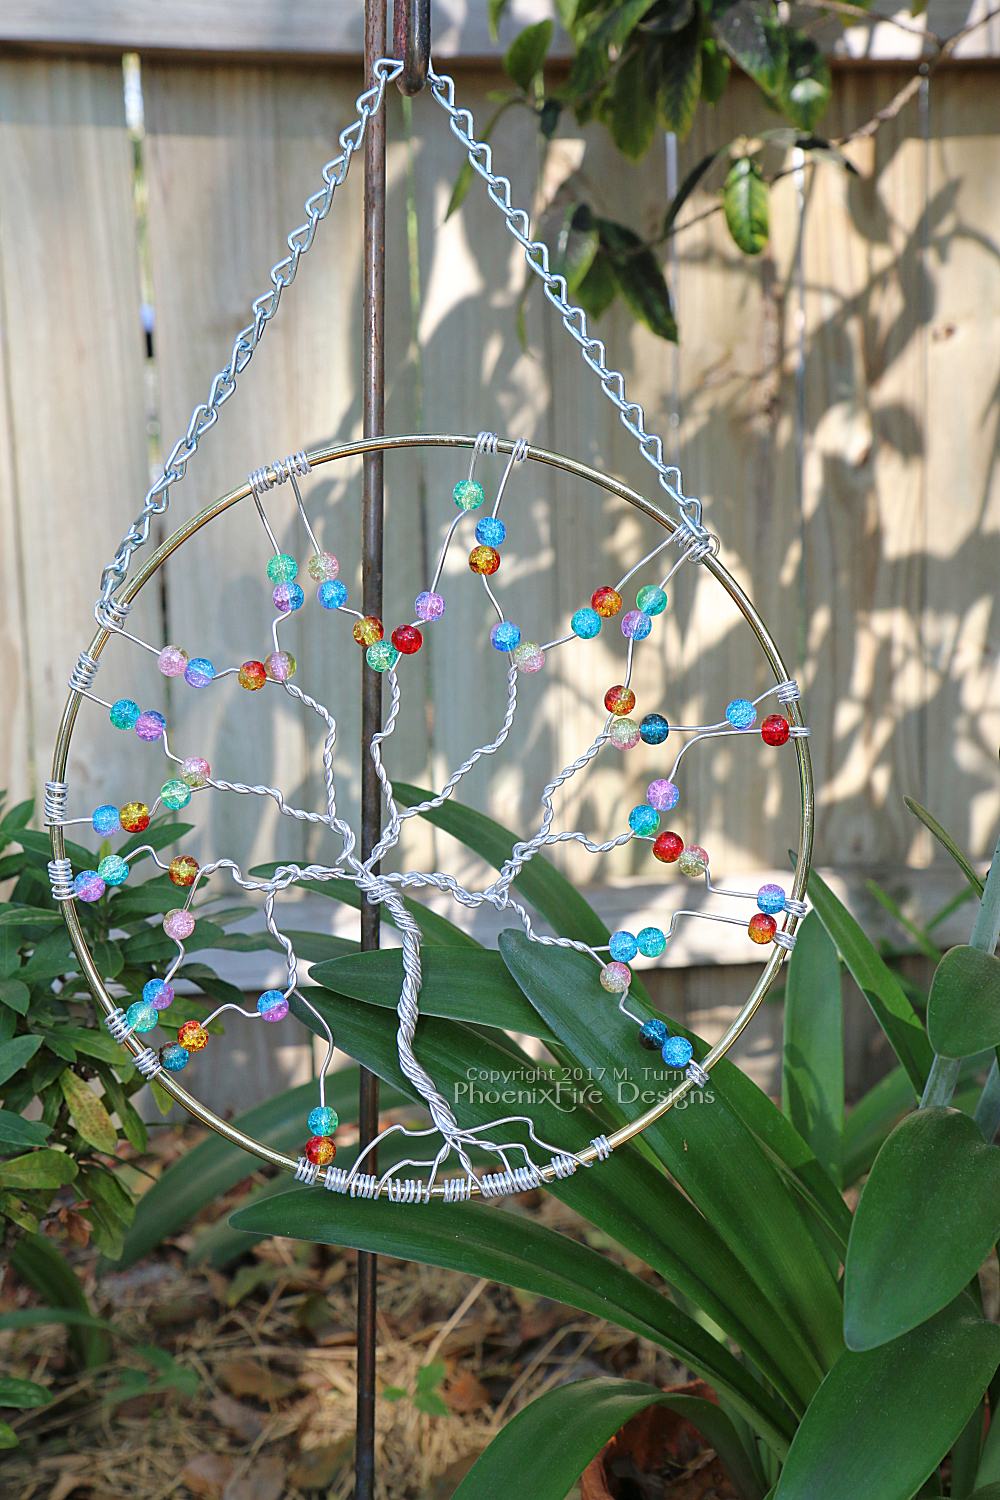 Silver anodized aluminum wire wrapped tree of life 8" suncatcher with rainbow glass fire cracked beads, perfect garden art, or handmade wall art for your home. By PhoenixFire Designs.